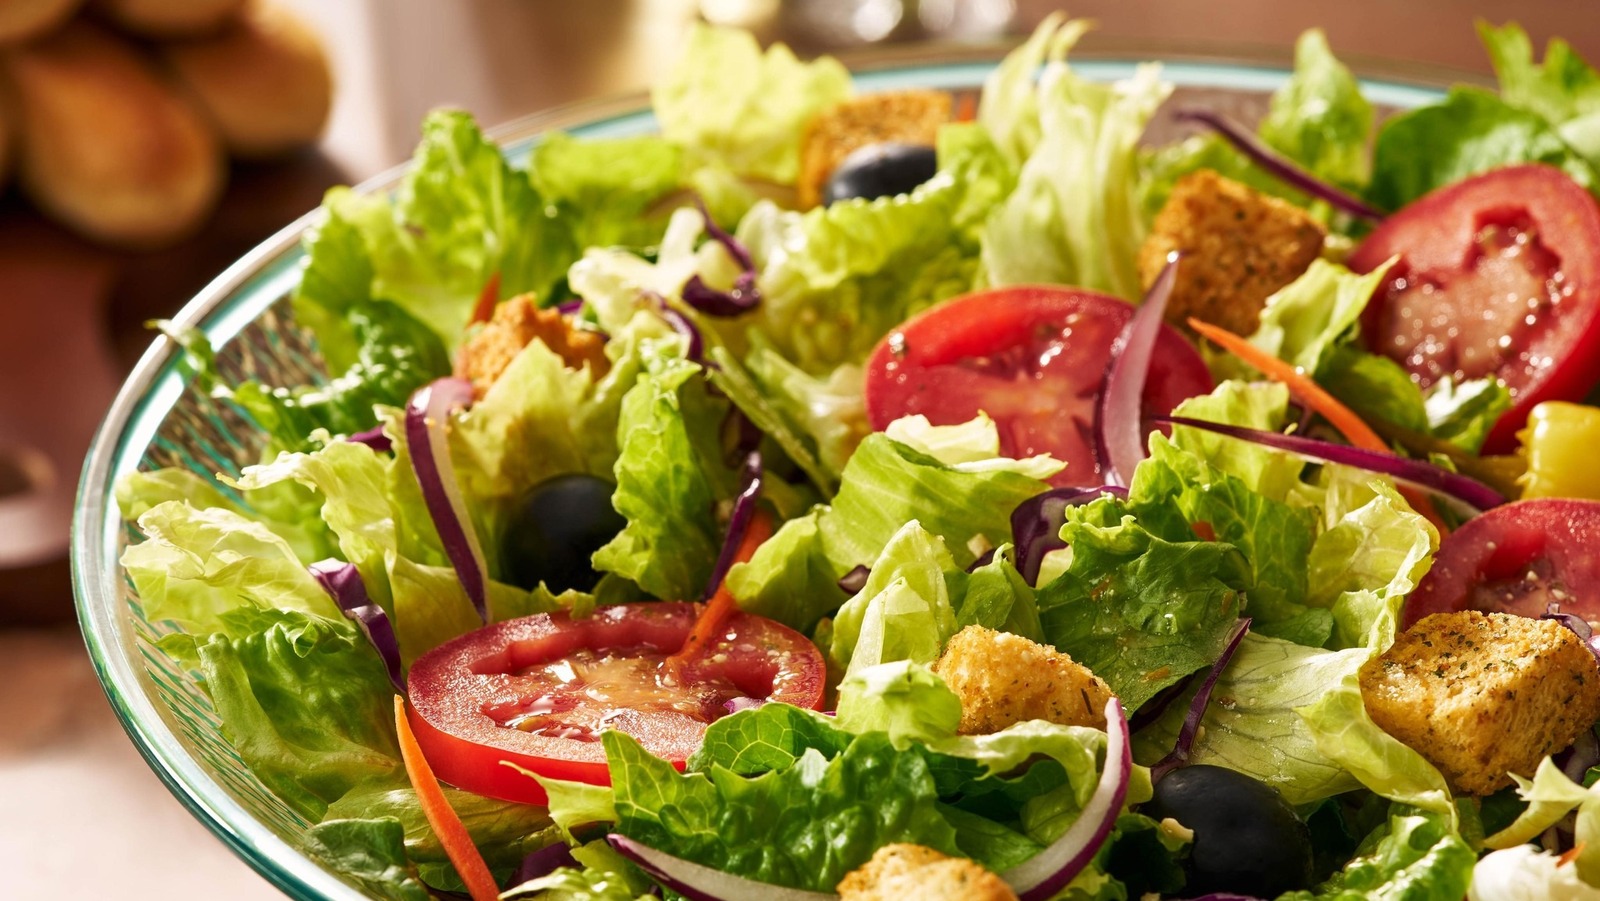 Olive Garden’s Beloved Unlimited Salad Is Specifically Made For Each Table